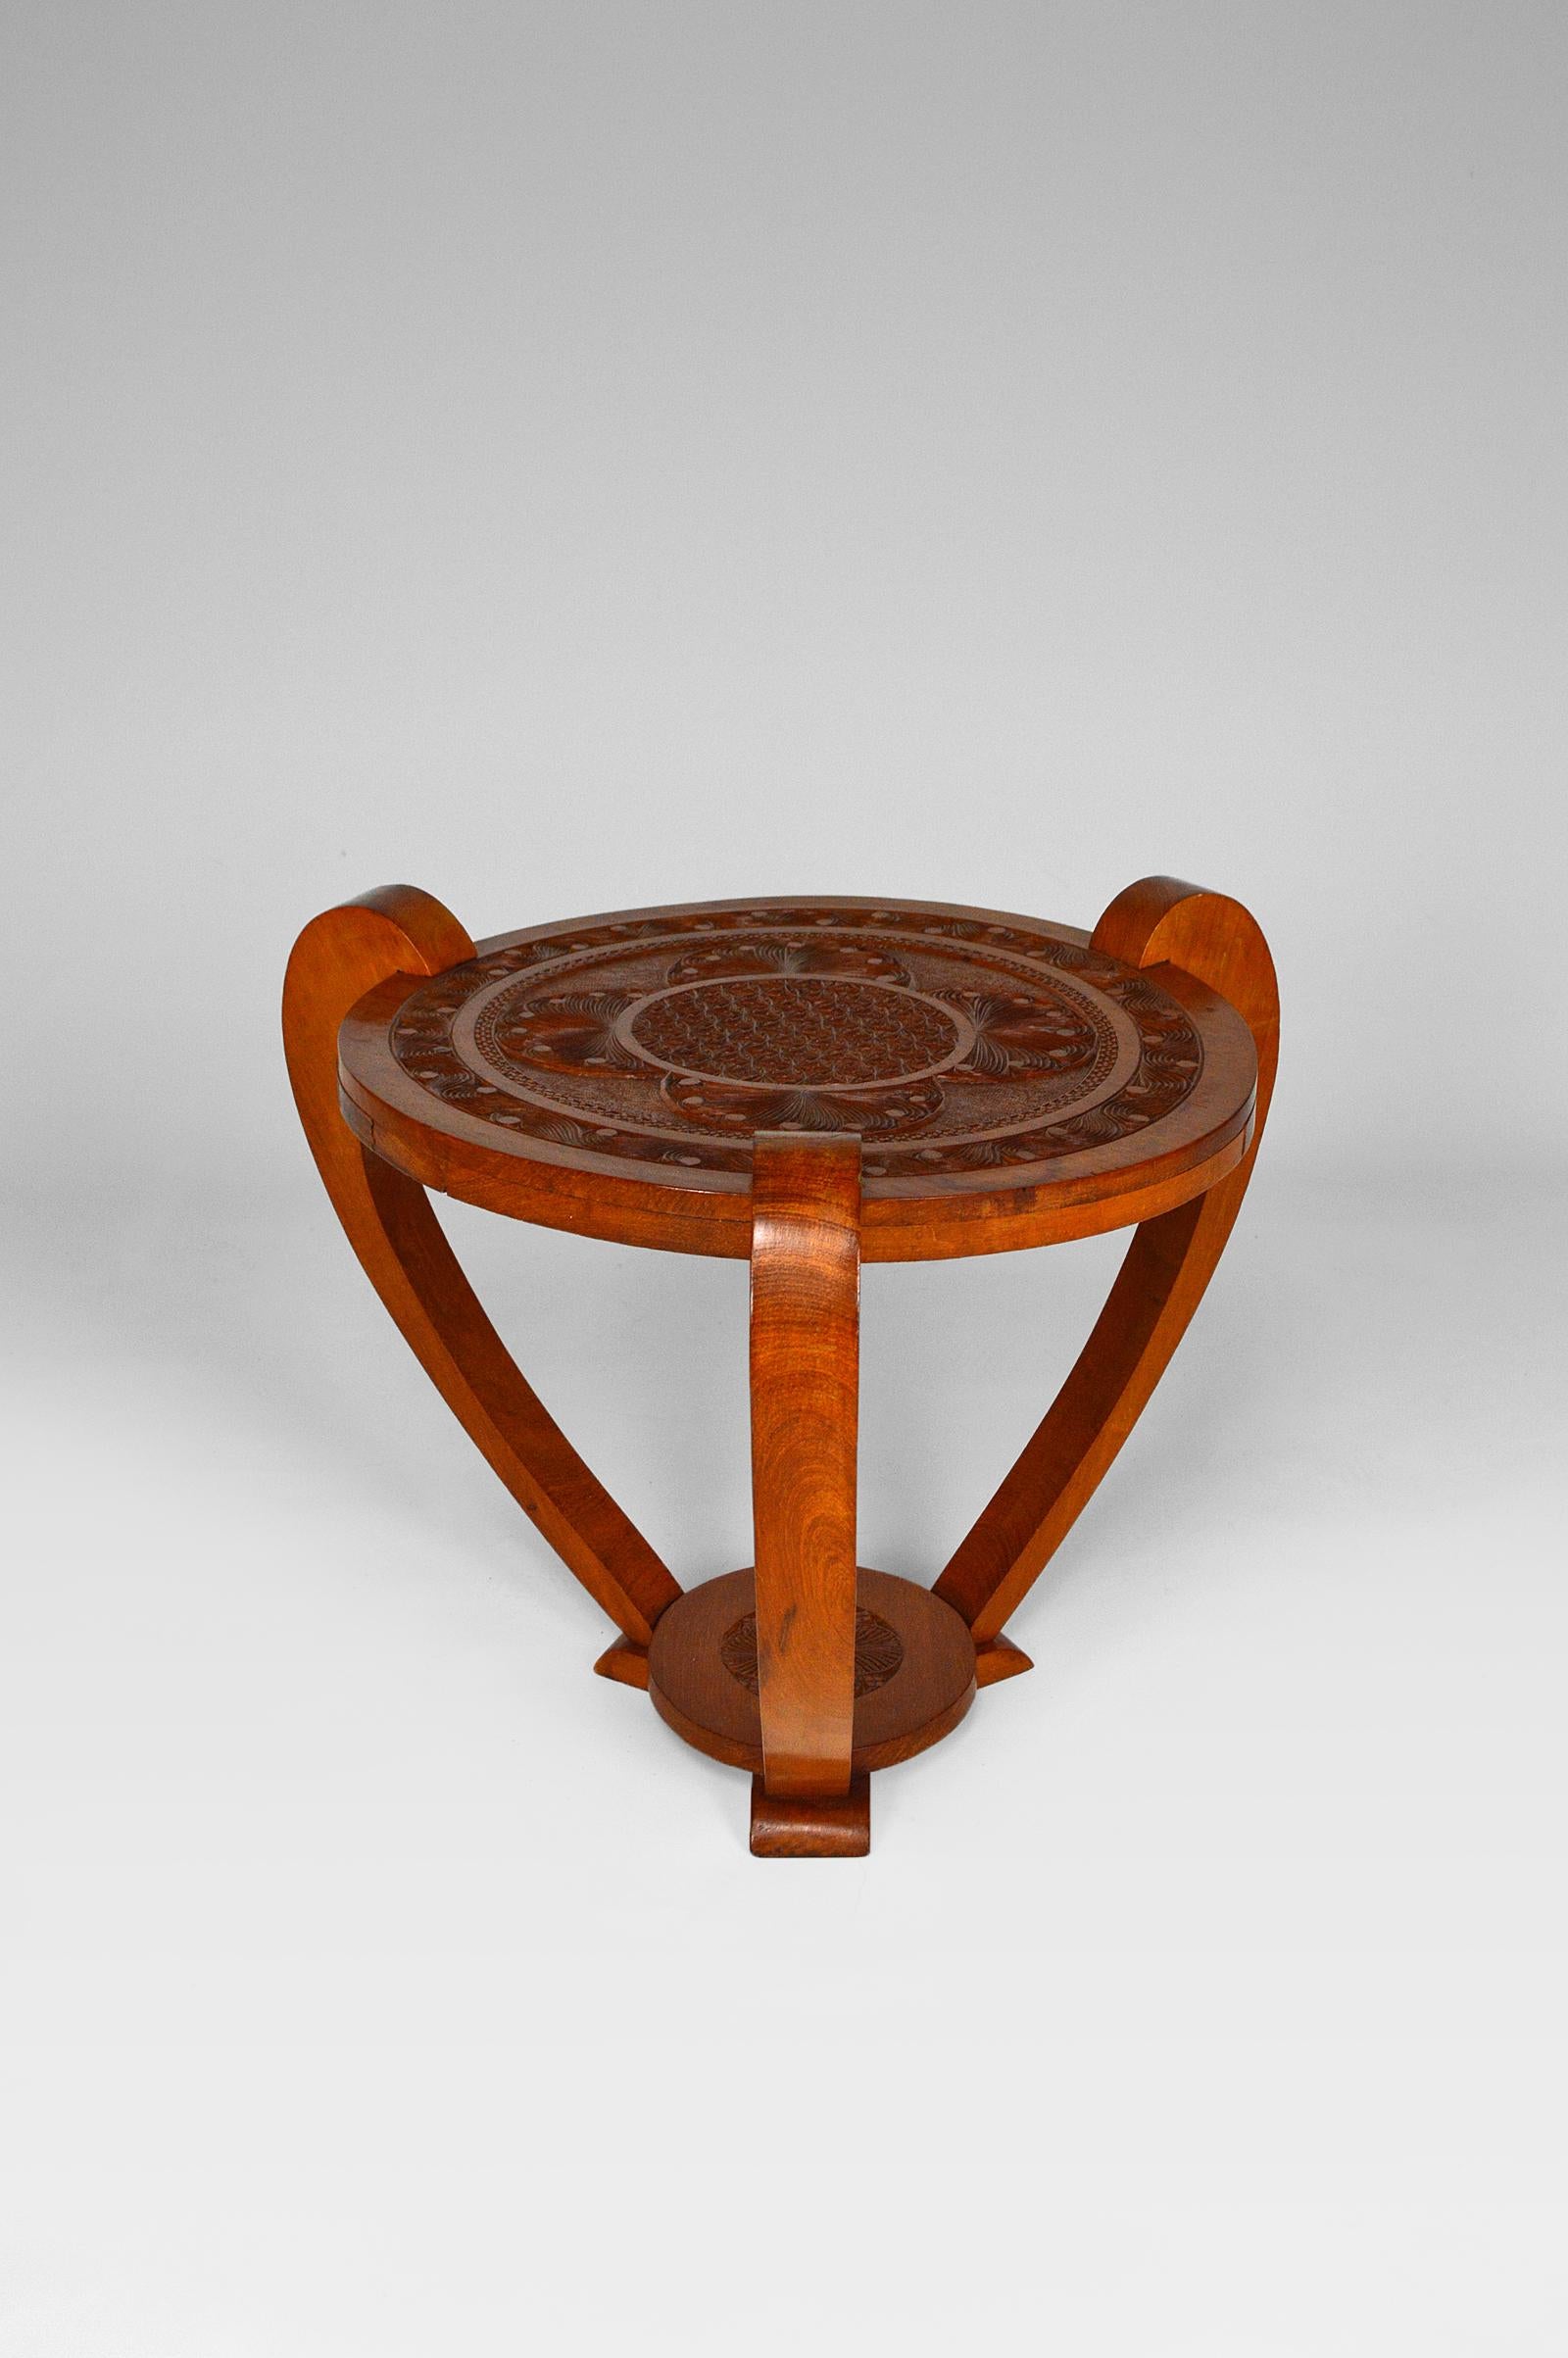 Small tripod tea or coffee table / side table in carved exotic wood.

The sculptures on the plateau represent a stylized sun surrounded by vegetation. 

Colonial Art Deco / Mid Century style, circa 1930-1940.
Country of origin unknown.

In